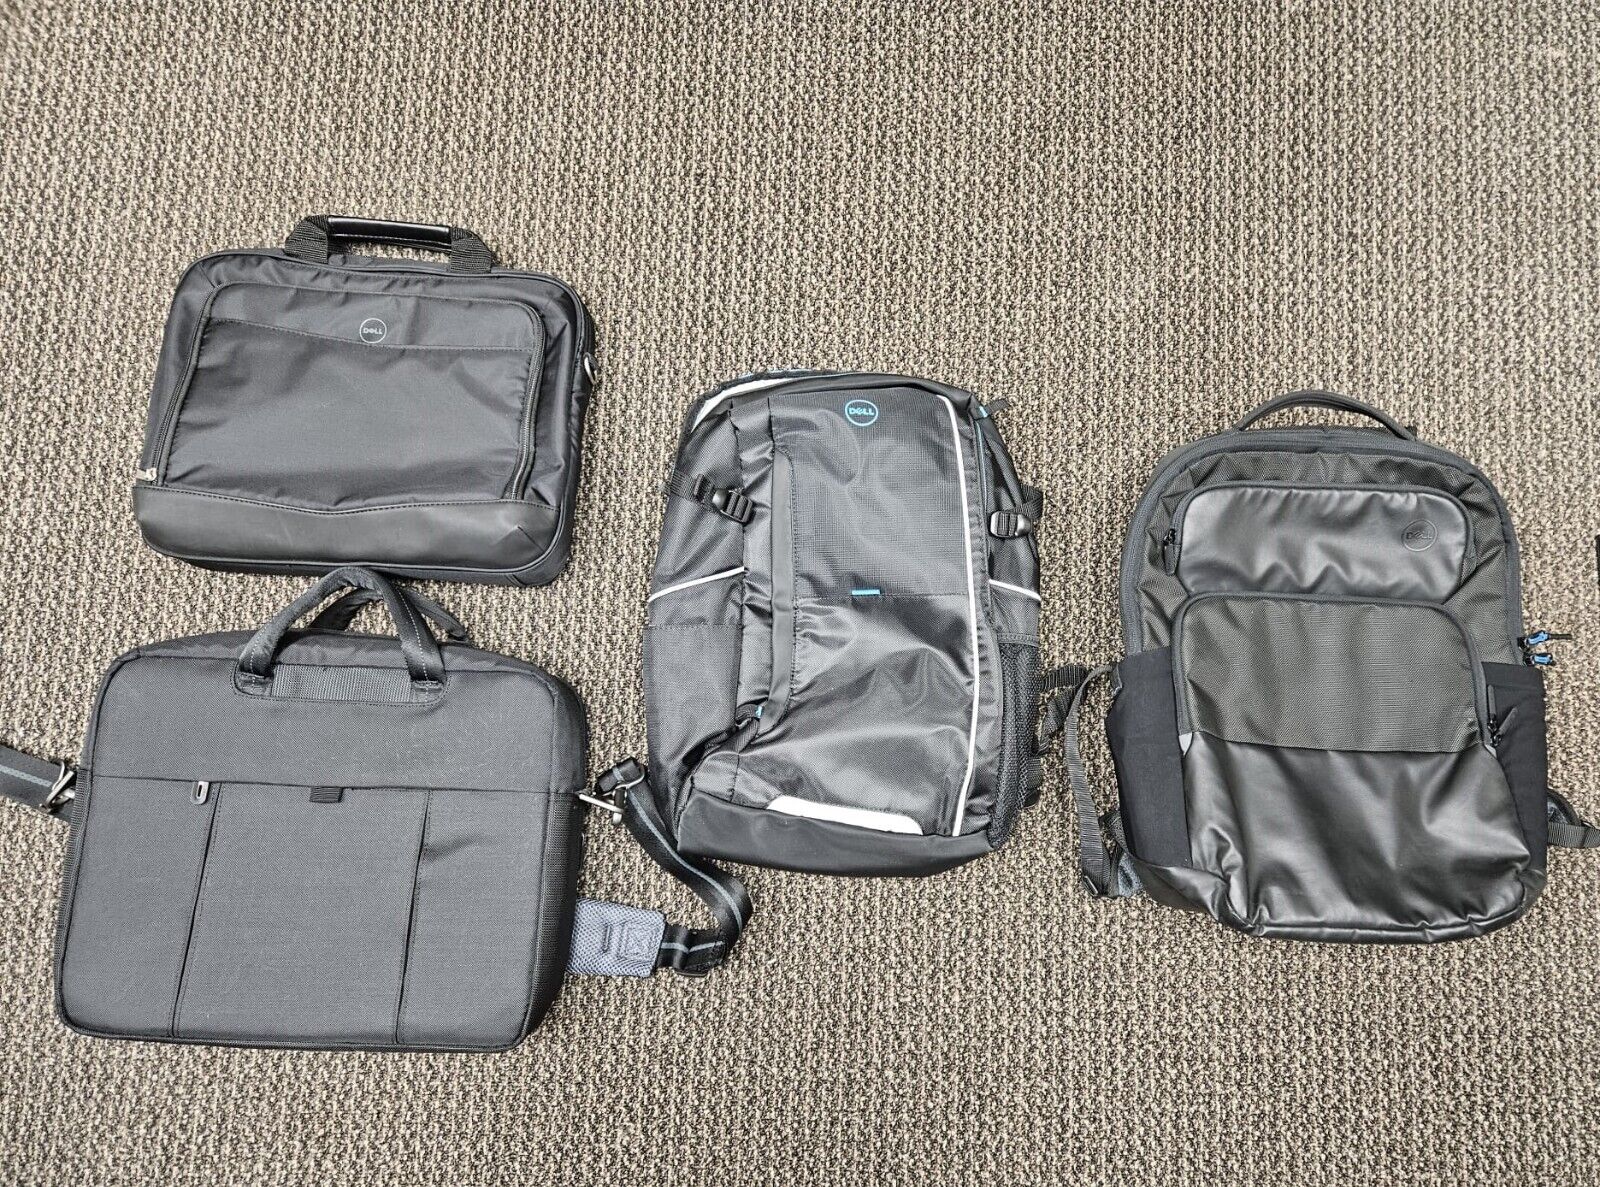 Lot of 10 X Assorted Dell Geniune Laptop Bags - Mix of Backpacks / Carrying Case